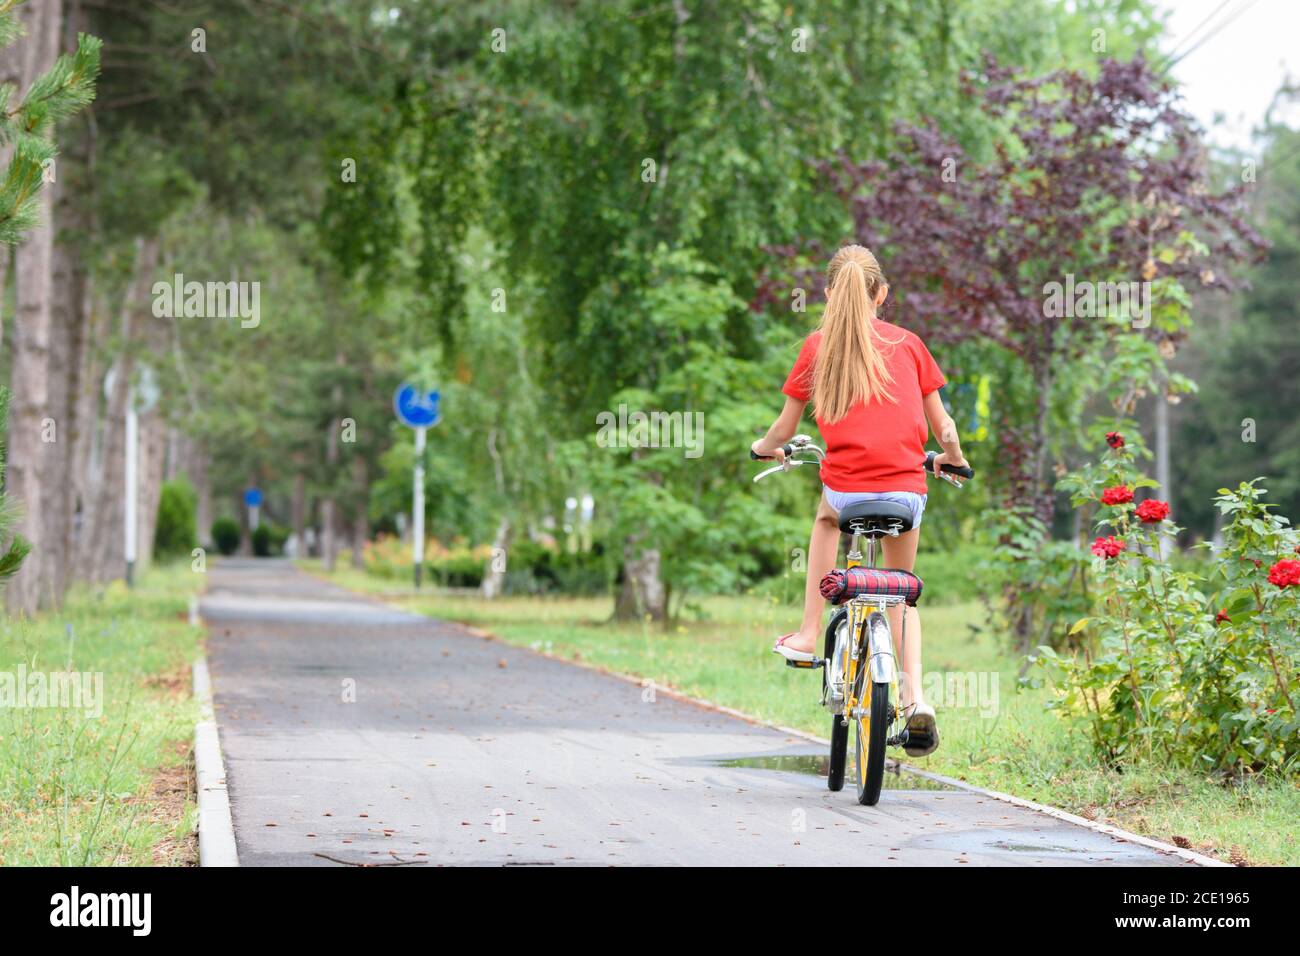 Girl in a red T-shirt rides on a bike path in the park Stock Photo